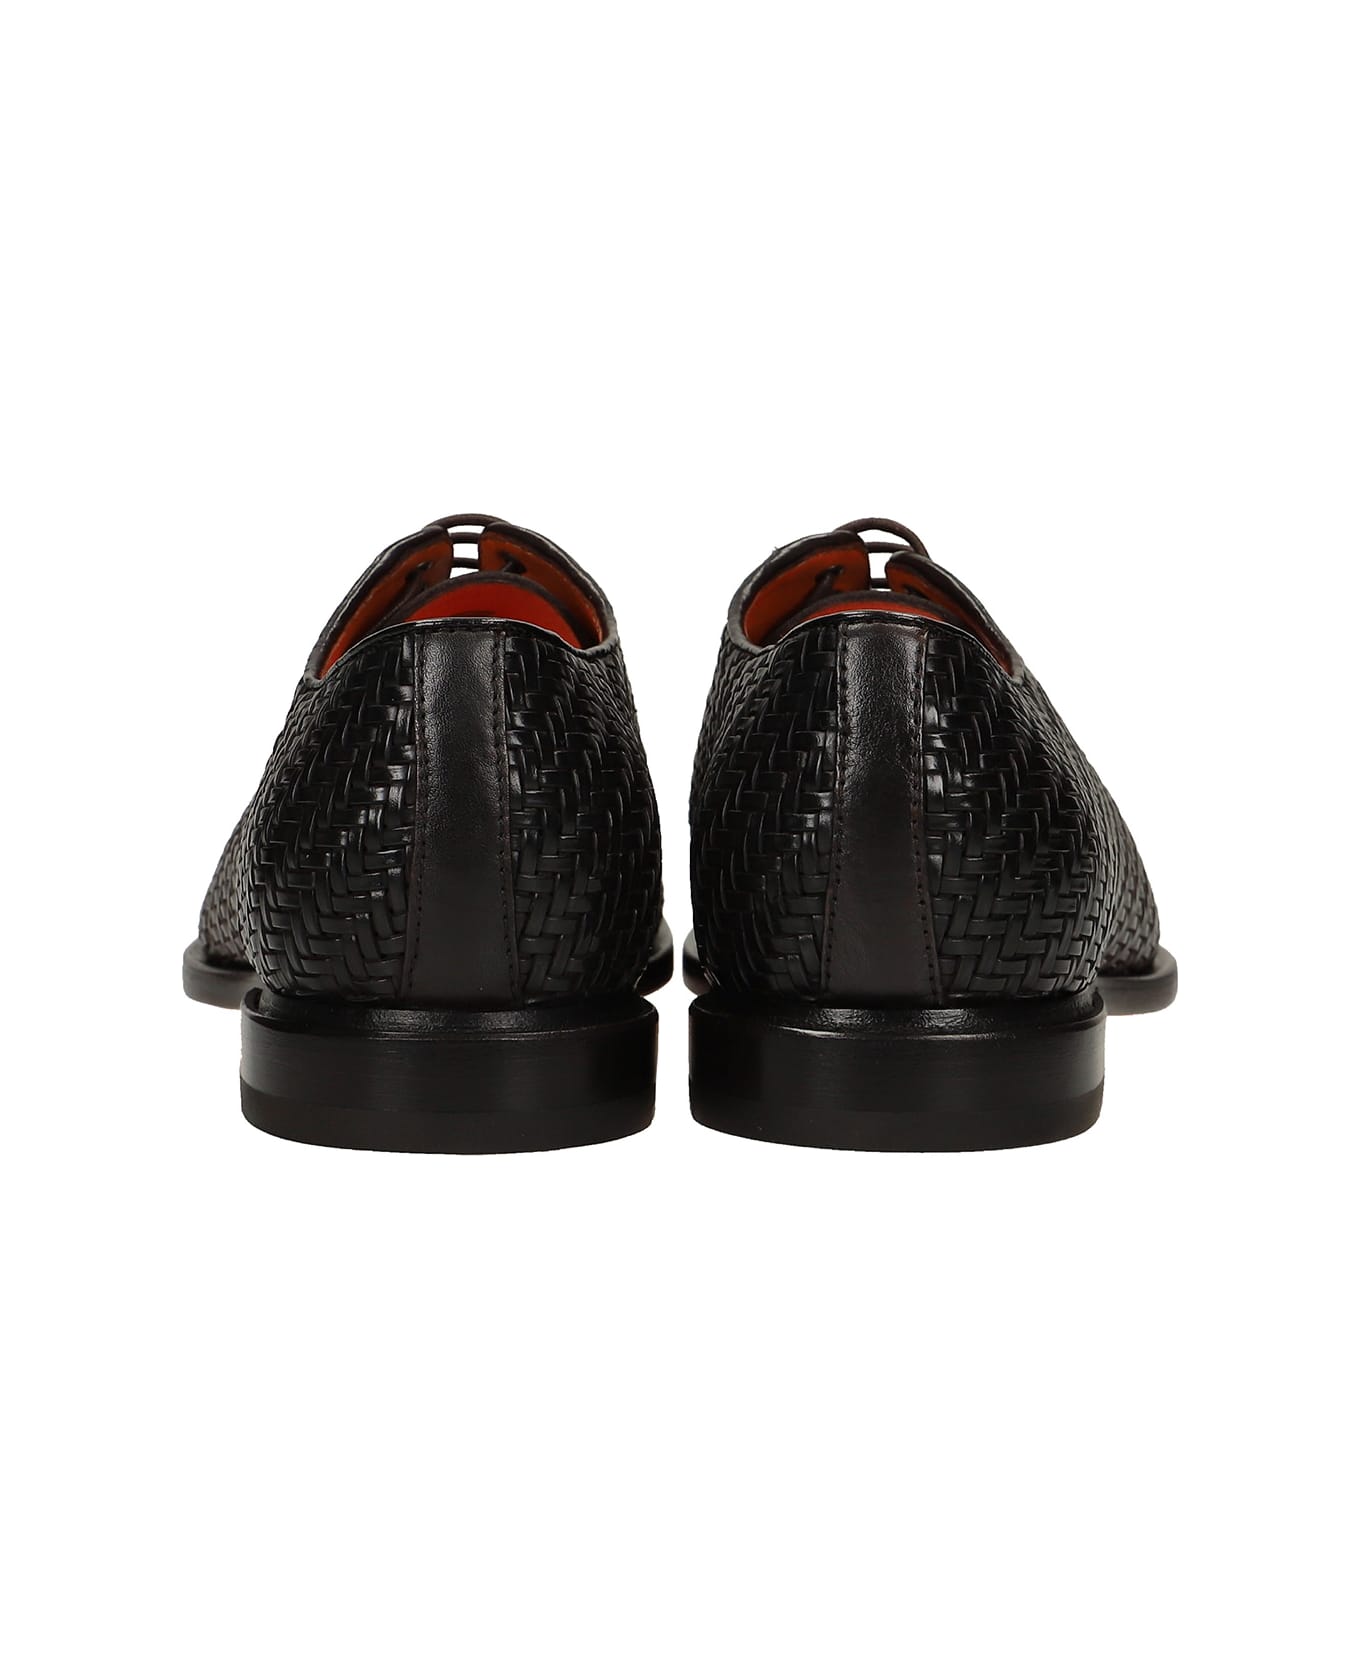 Santoni Lace Up Shoes In Brown Leather - brown